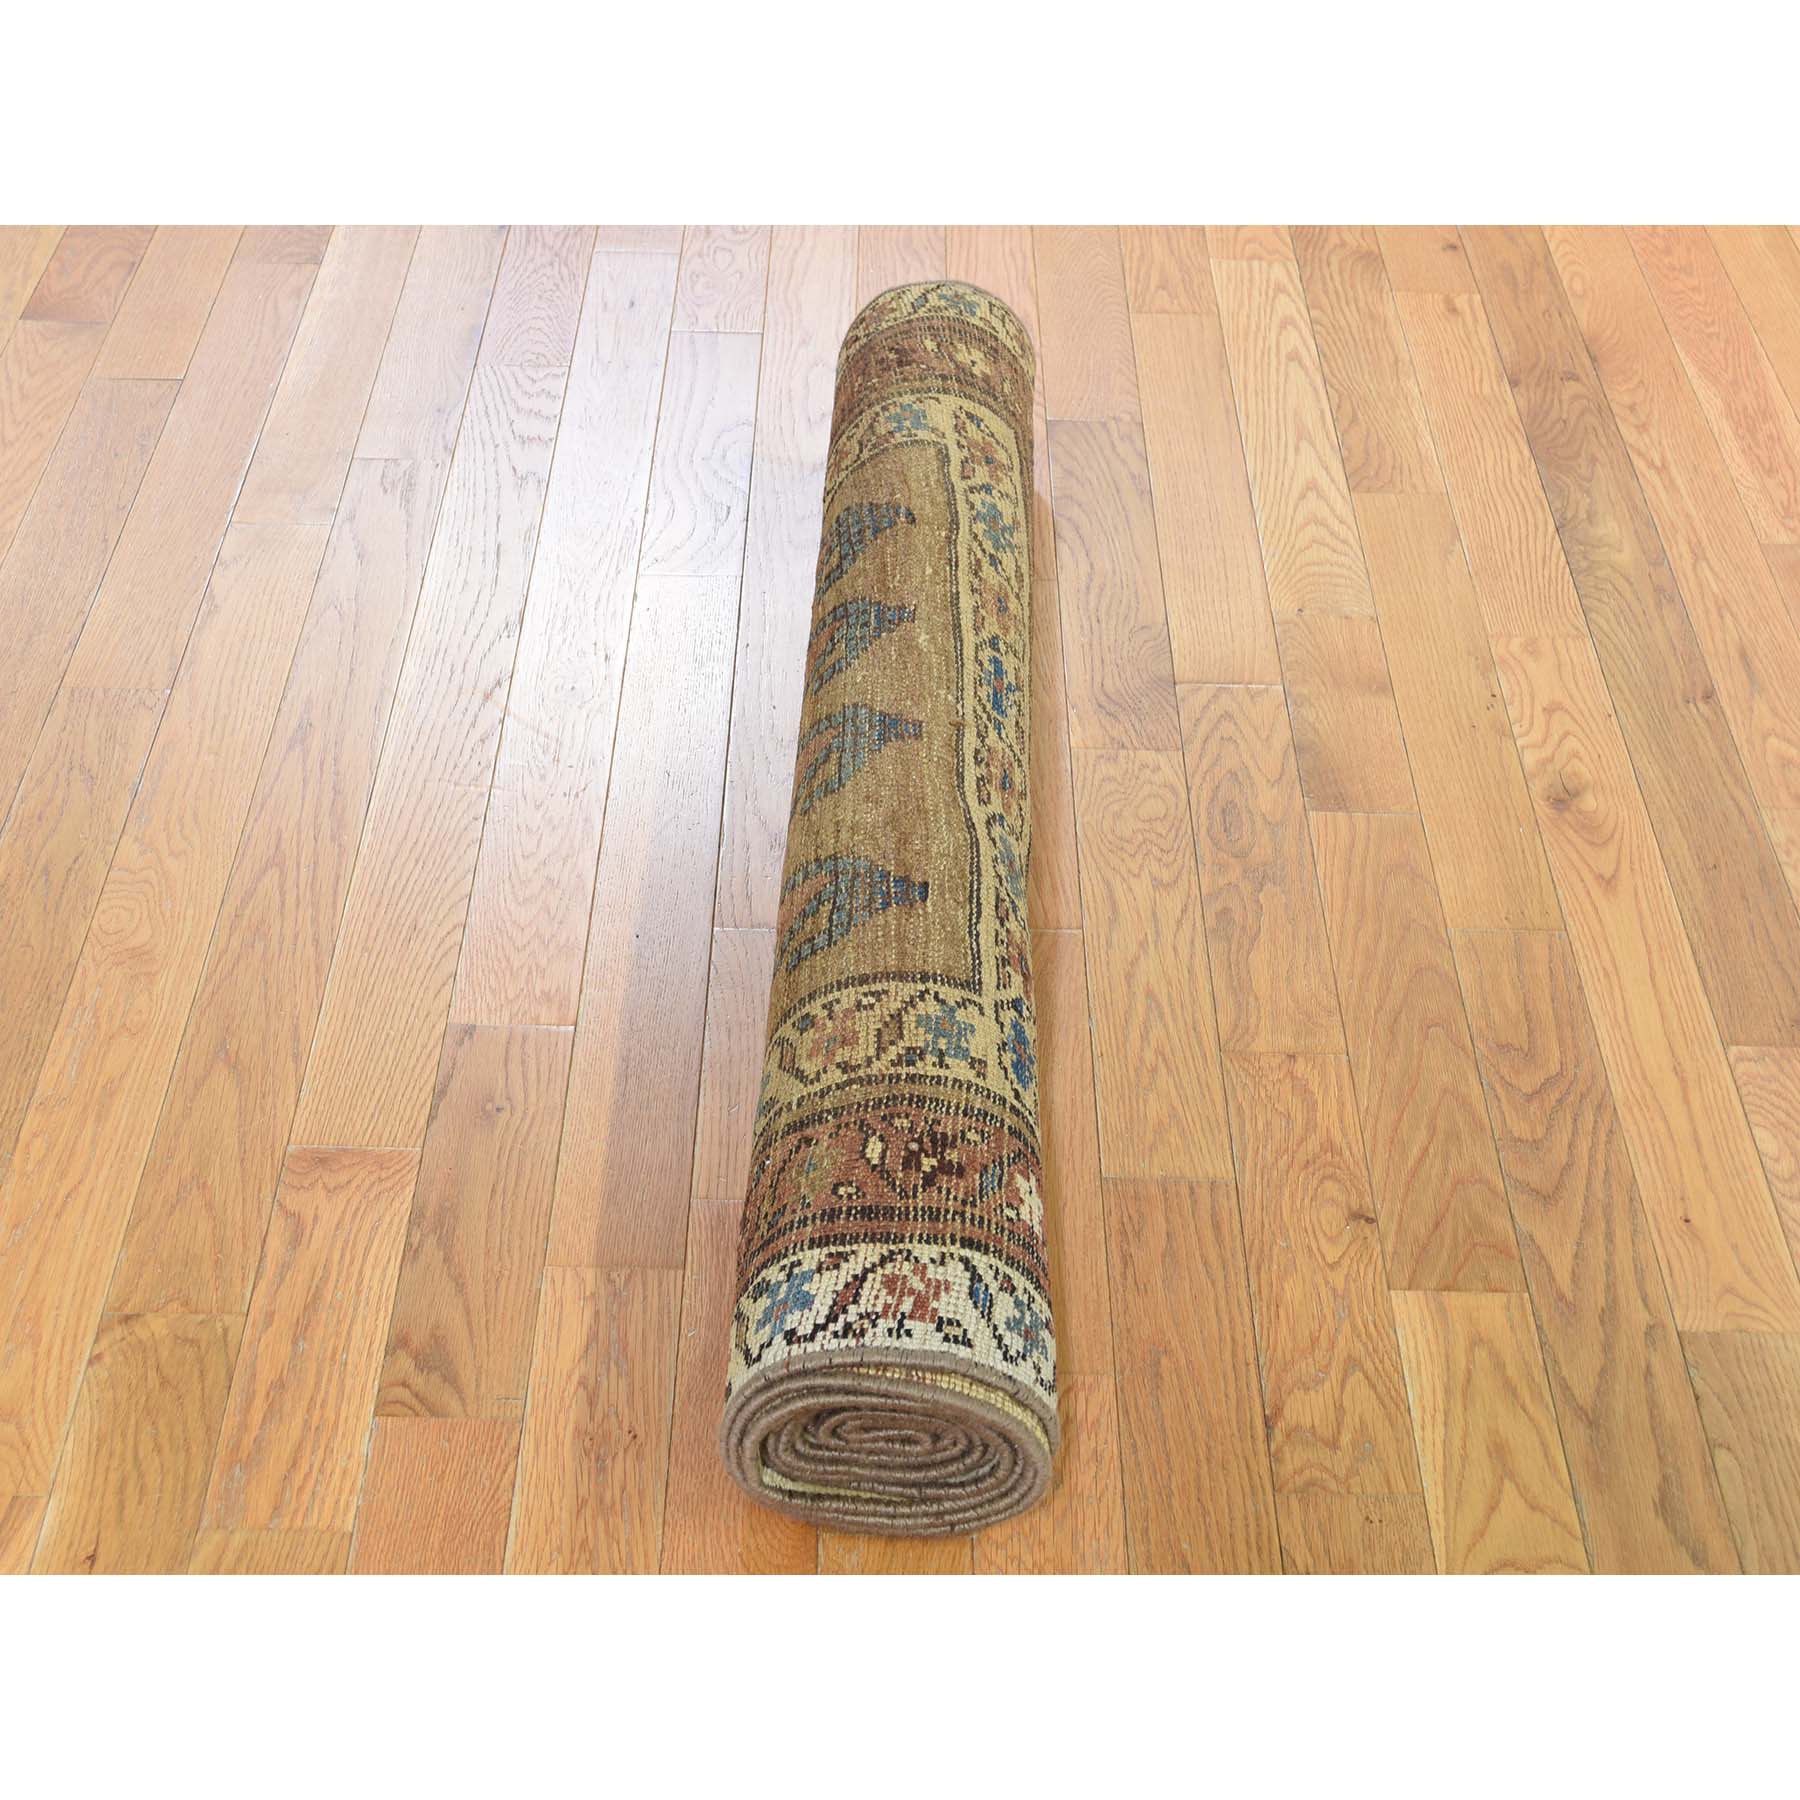 3-9 x10-7  Antique Persian North West Boteh Design Camel Hair Wide Runner Hand-Knotted Oriental Rug 